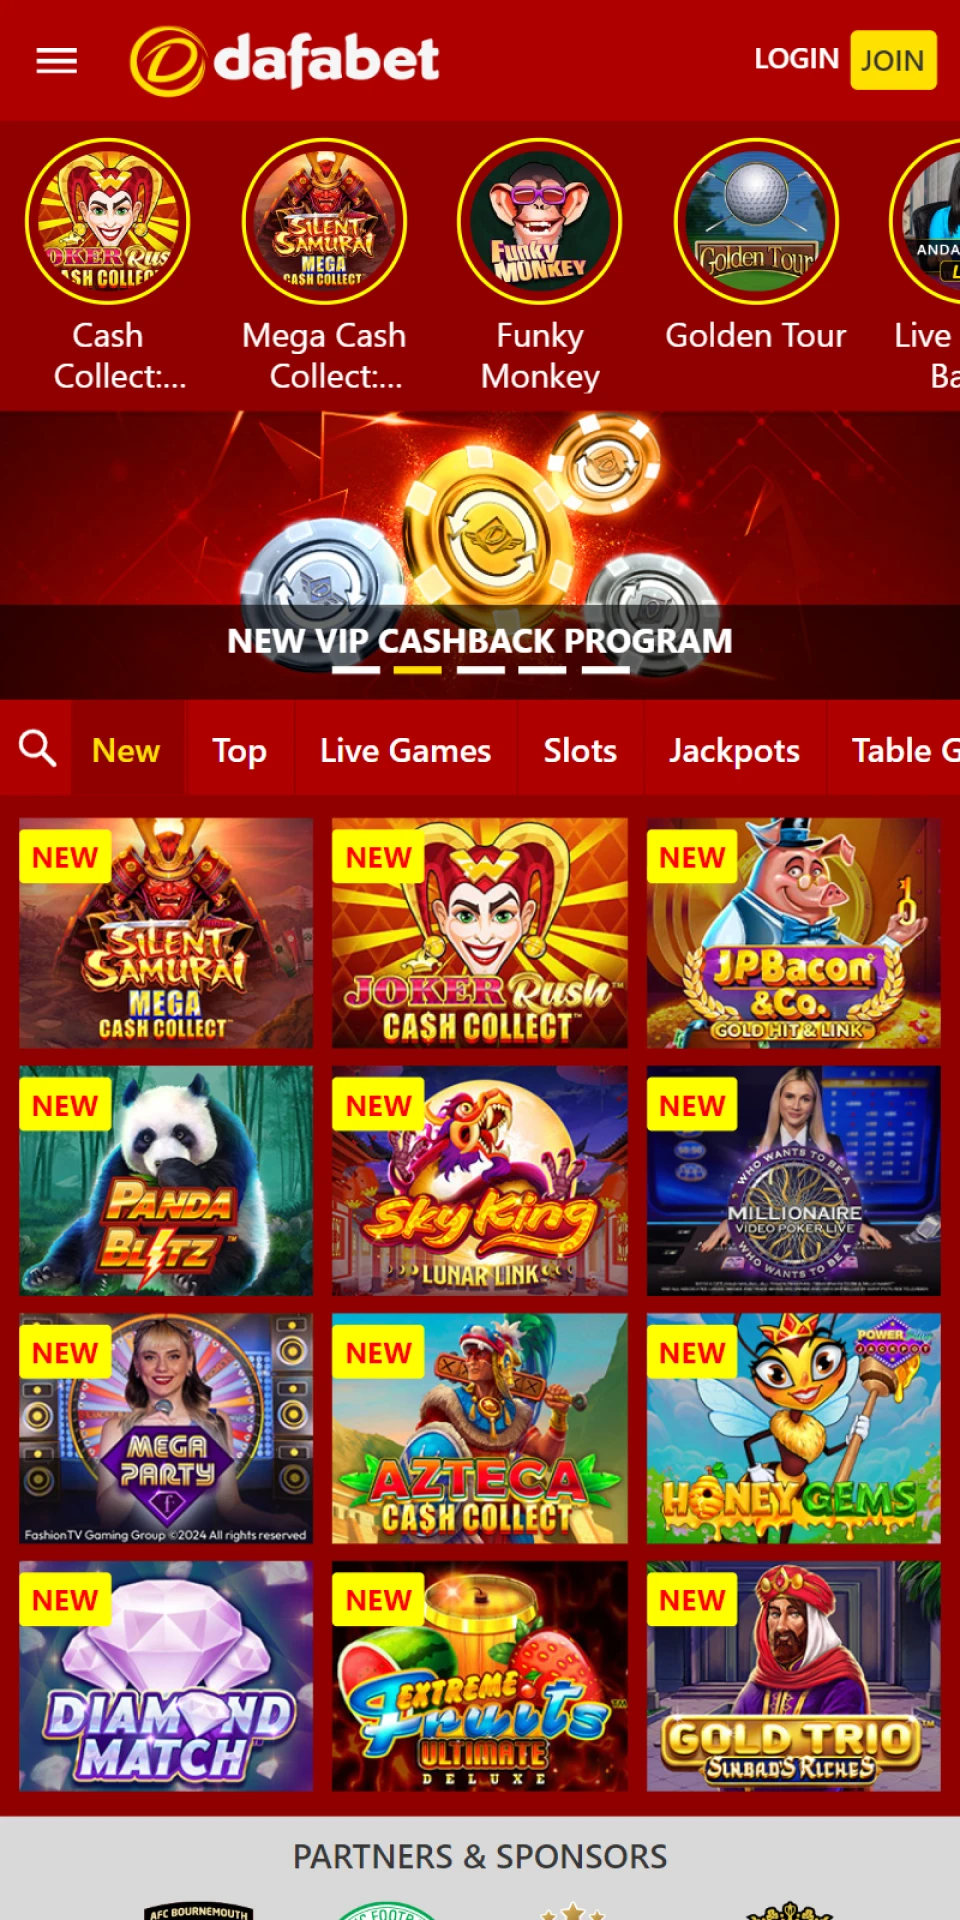 Play casino games on the Dafabet mobile app.